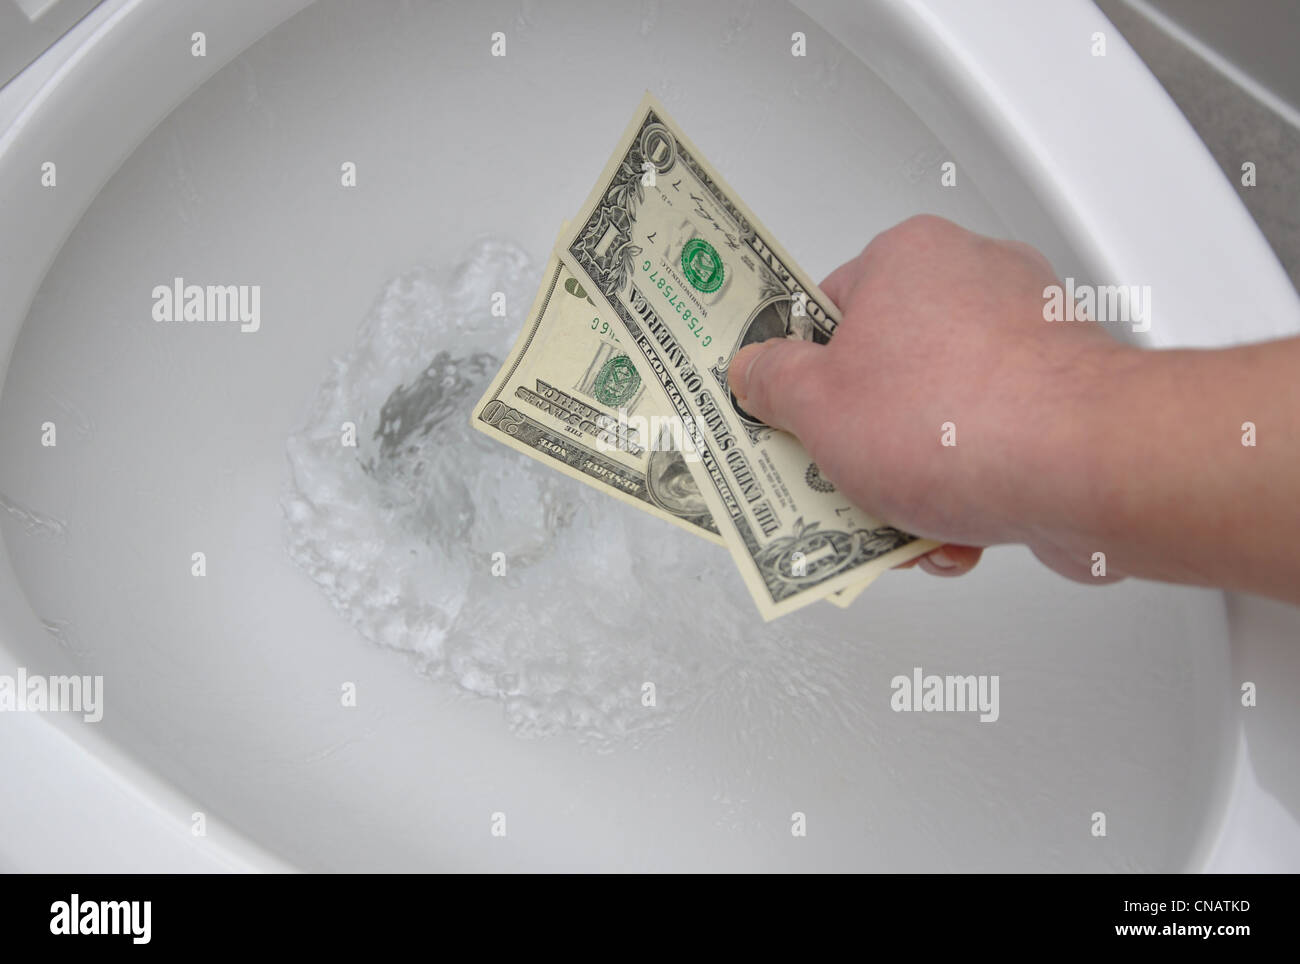 Abstract waste your money Stock Photo